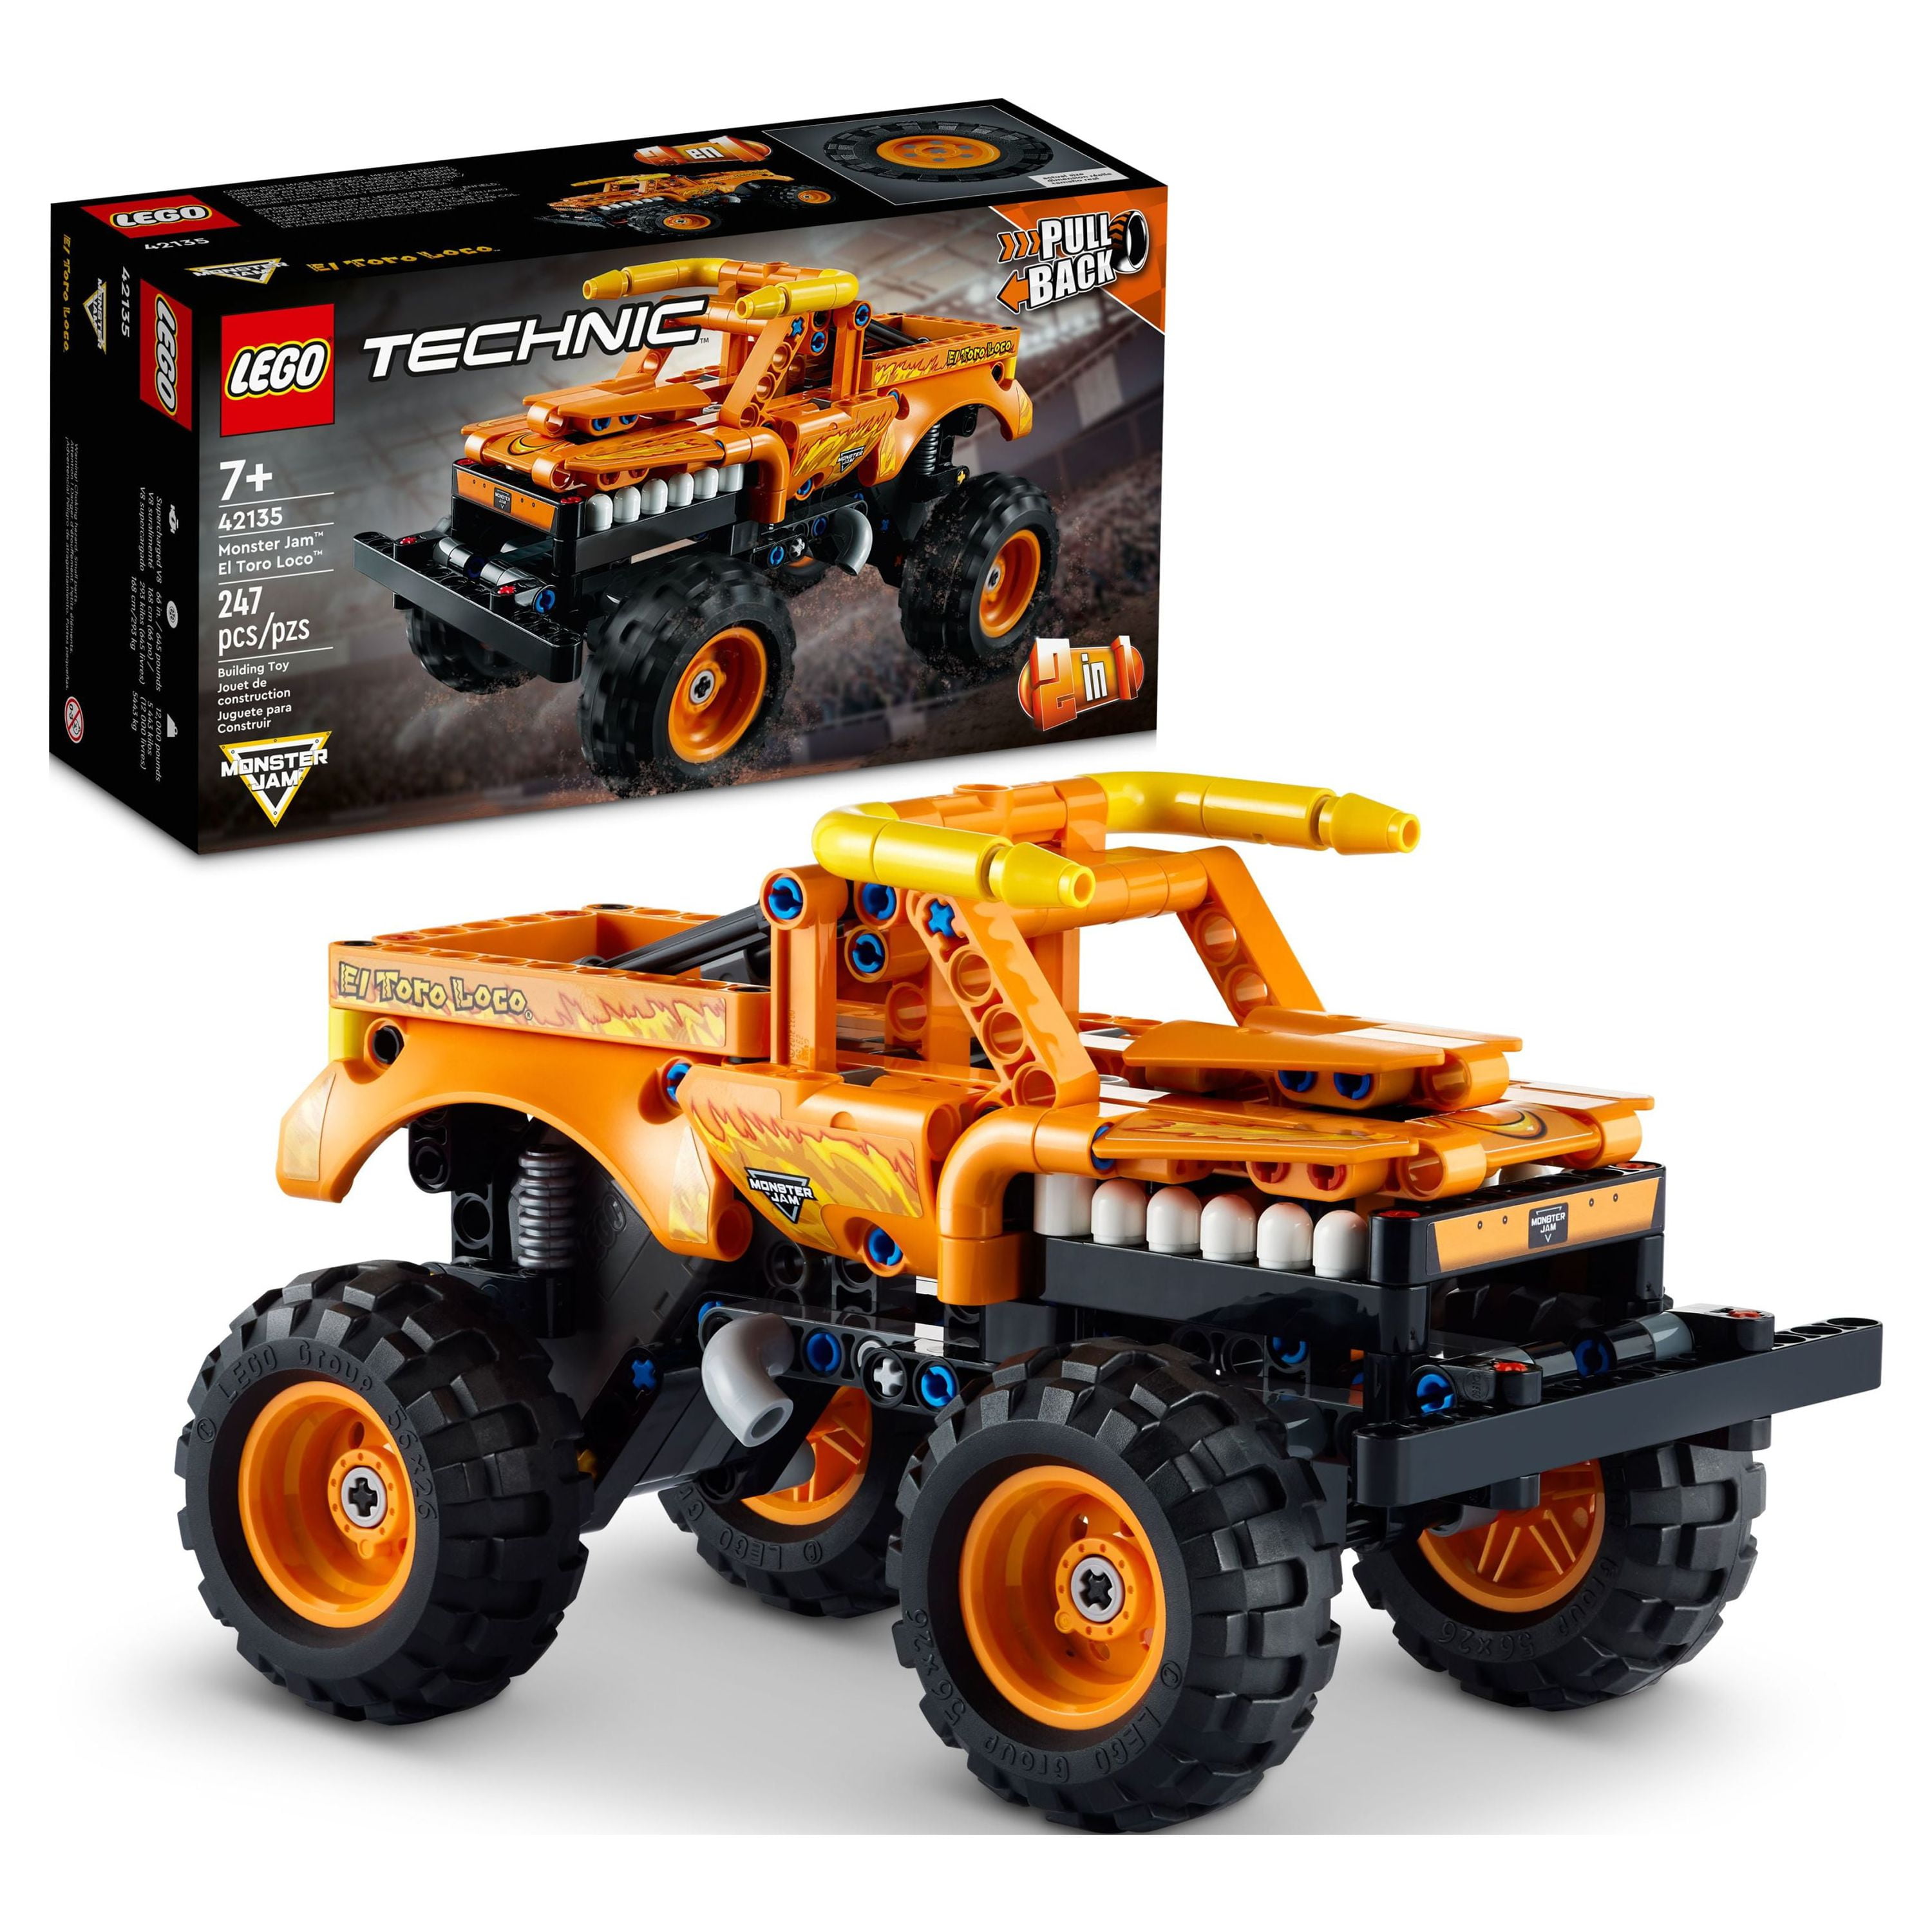 LEGO Technic Monster Jam El Toro Loco, 2 in 1 Pull Back Truck to Off Roader  Car Toy 42135, Monster Truck and Race Car Building Toy, Construction Kit